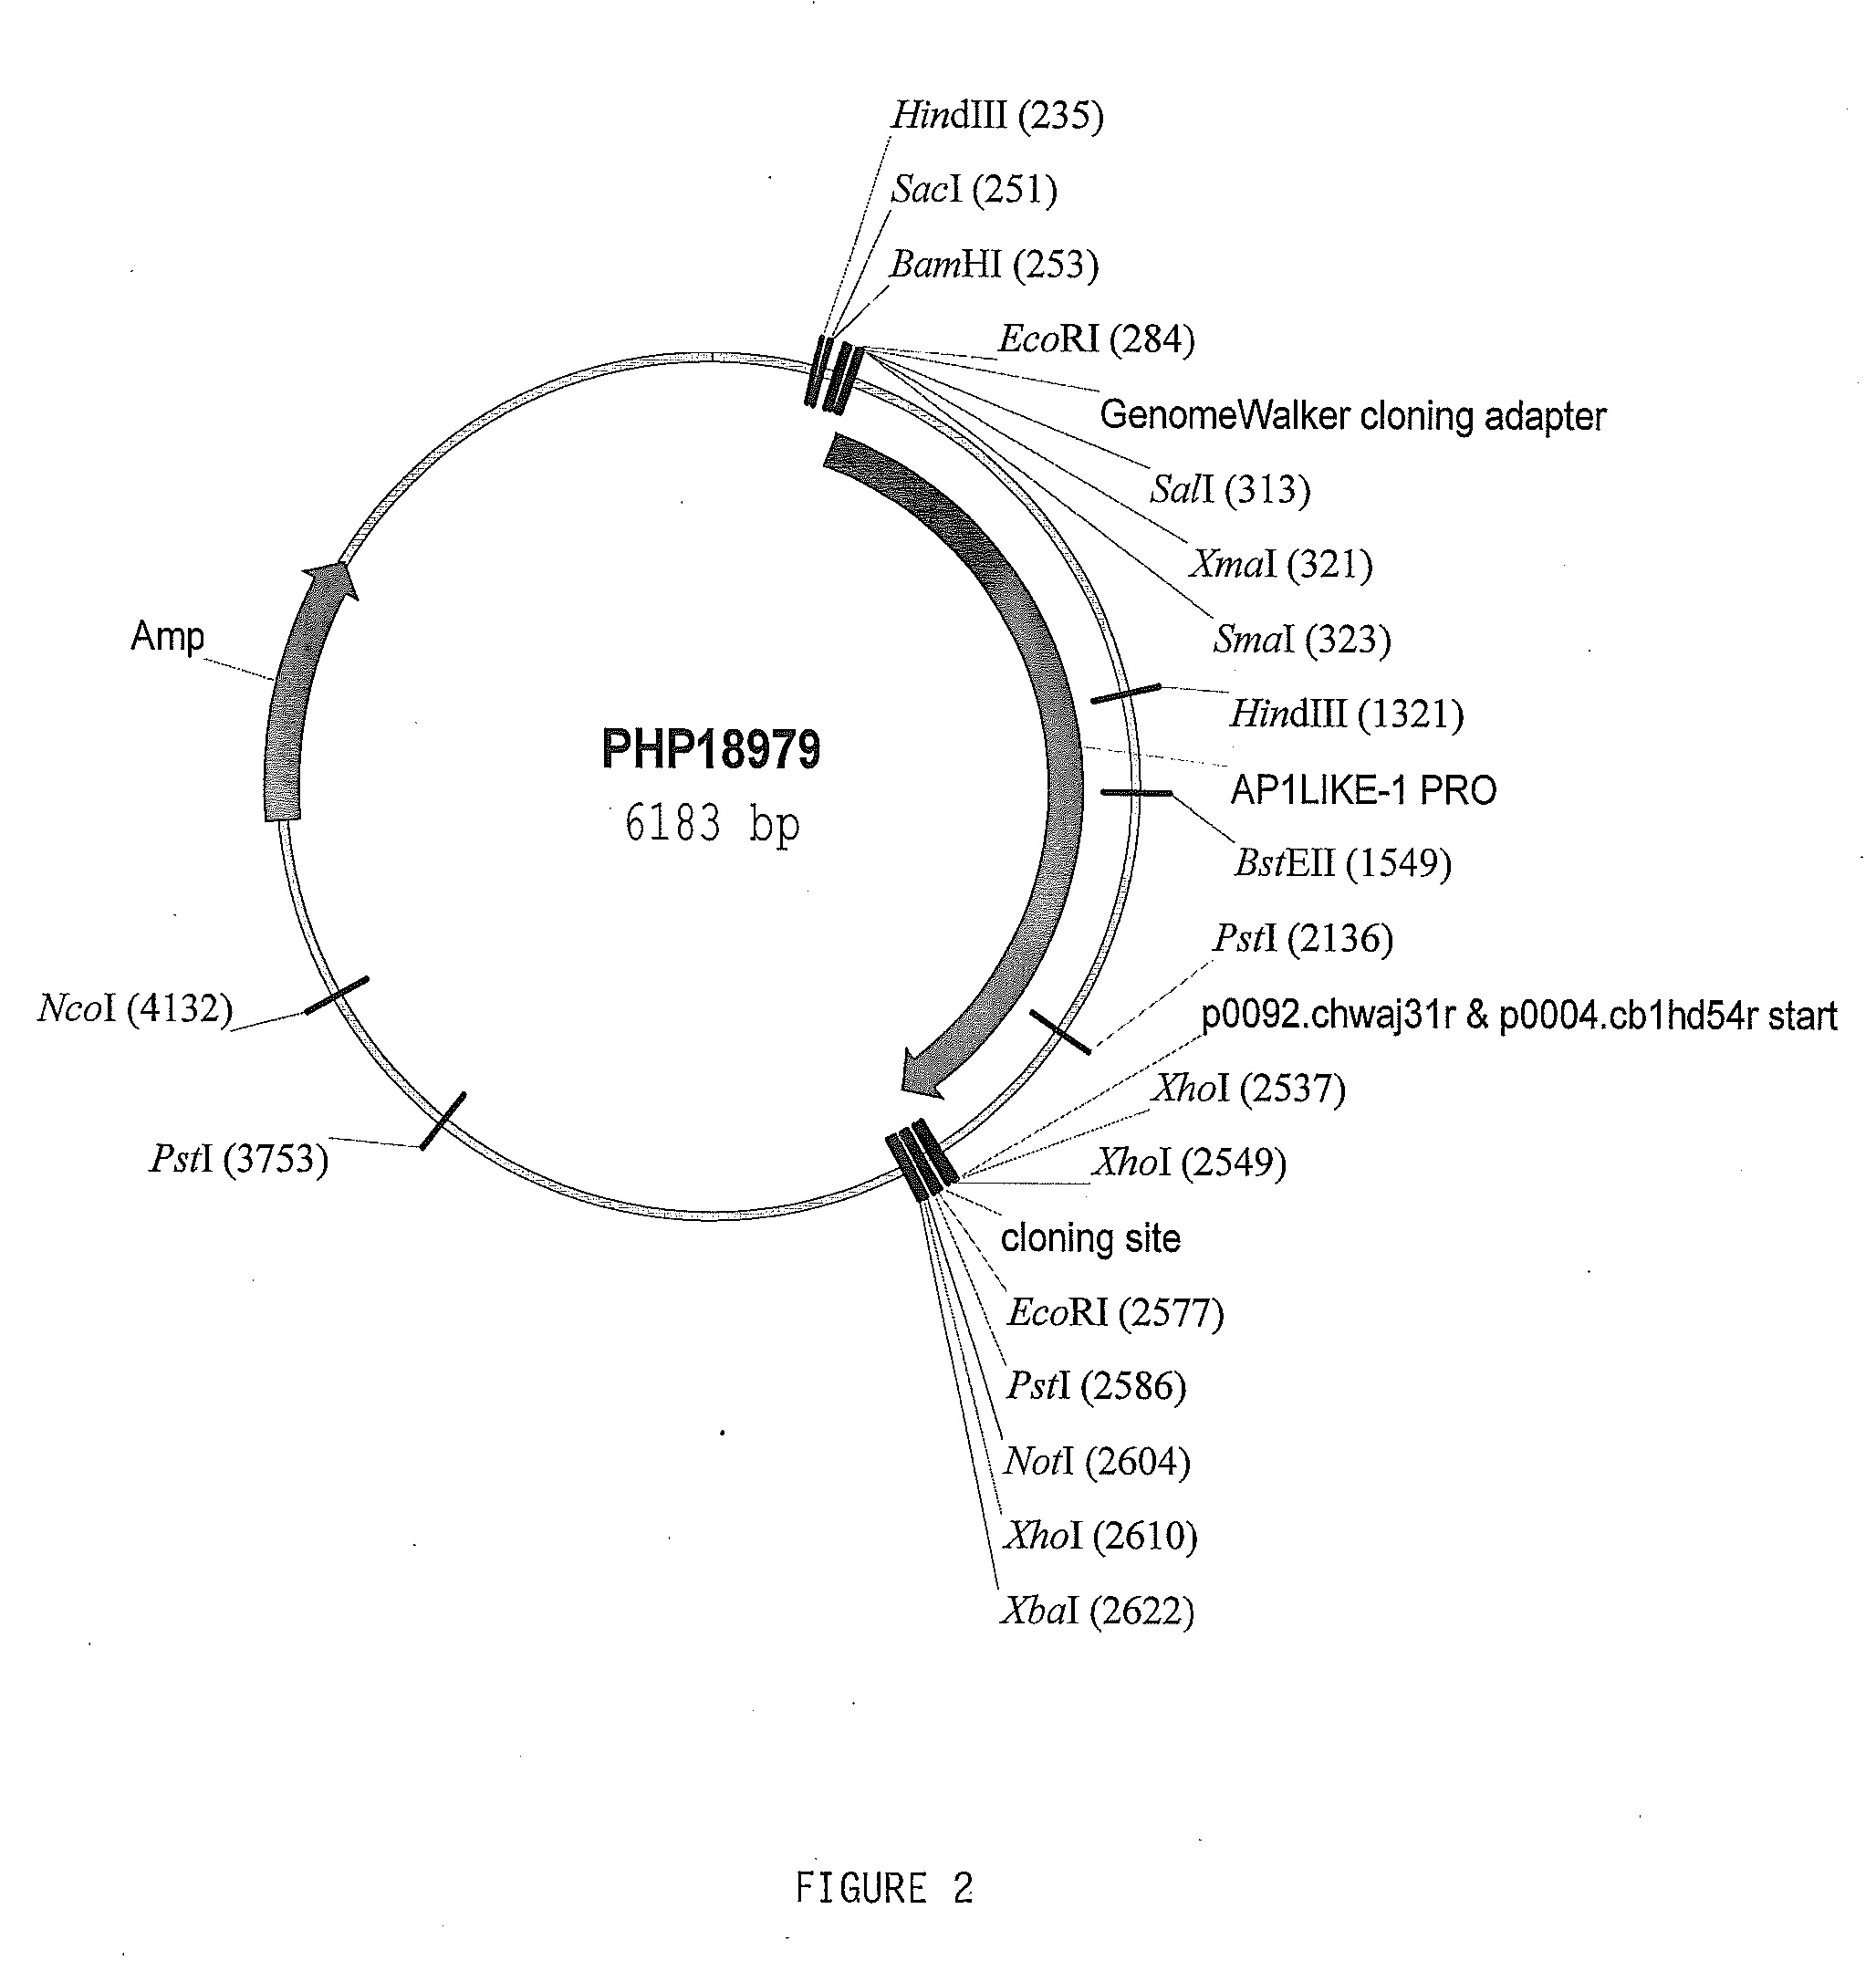 Early-inflorescence-preferred regulatory elements and uses thereof